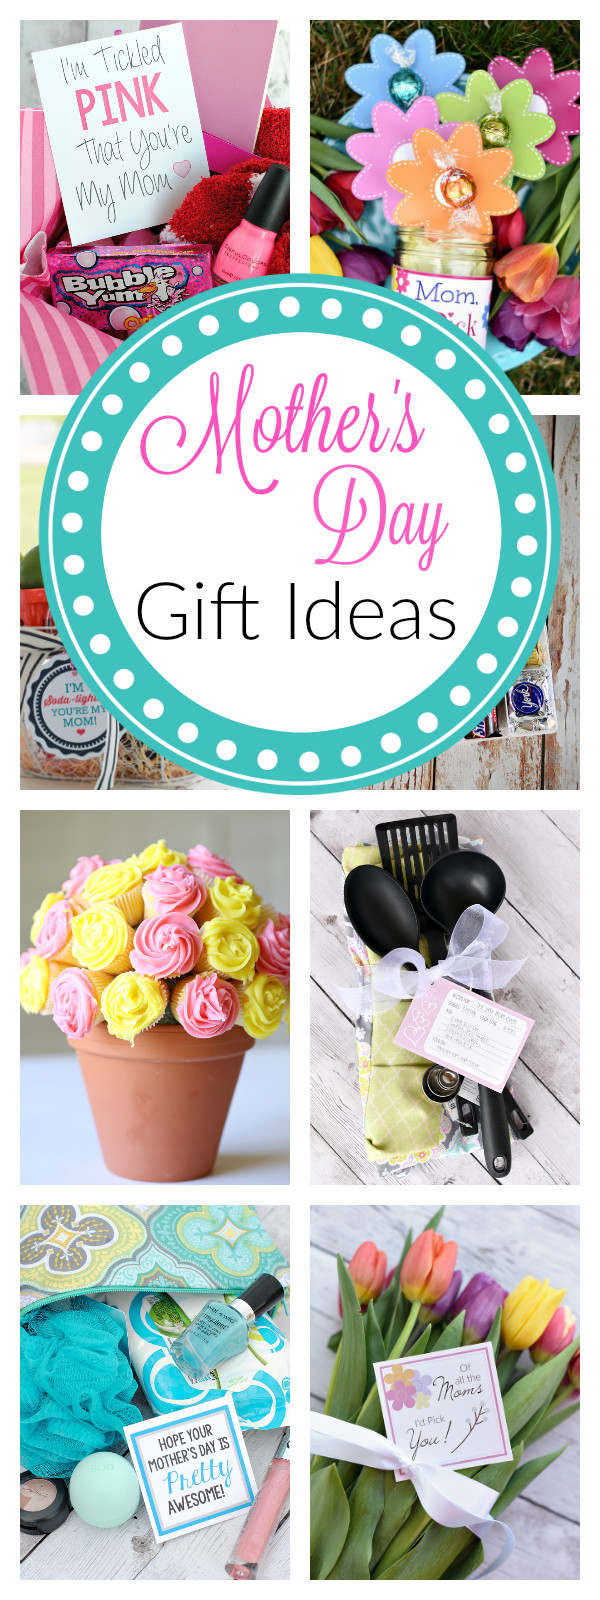 What To Make For Mother'S Day Gift Ideas
 25 Fun Mother s Day Gift Ideas – Fun Squared